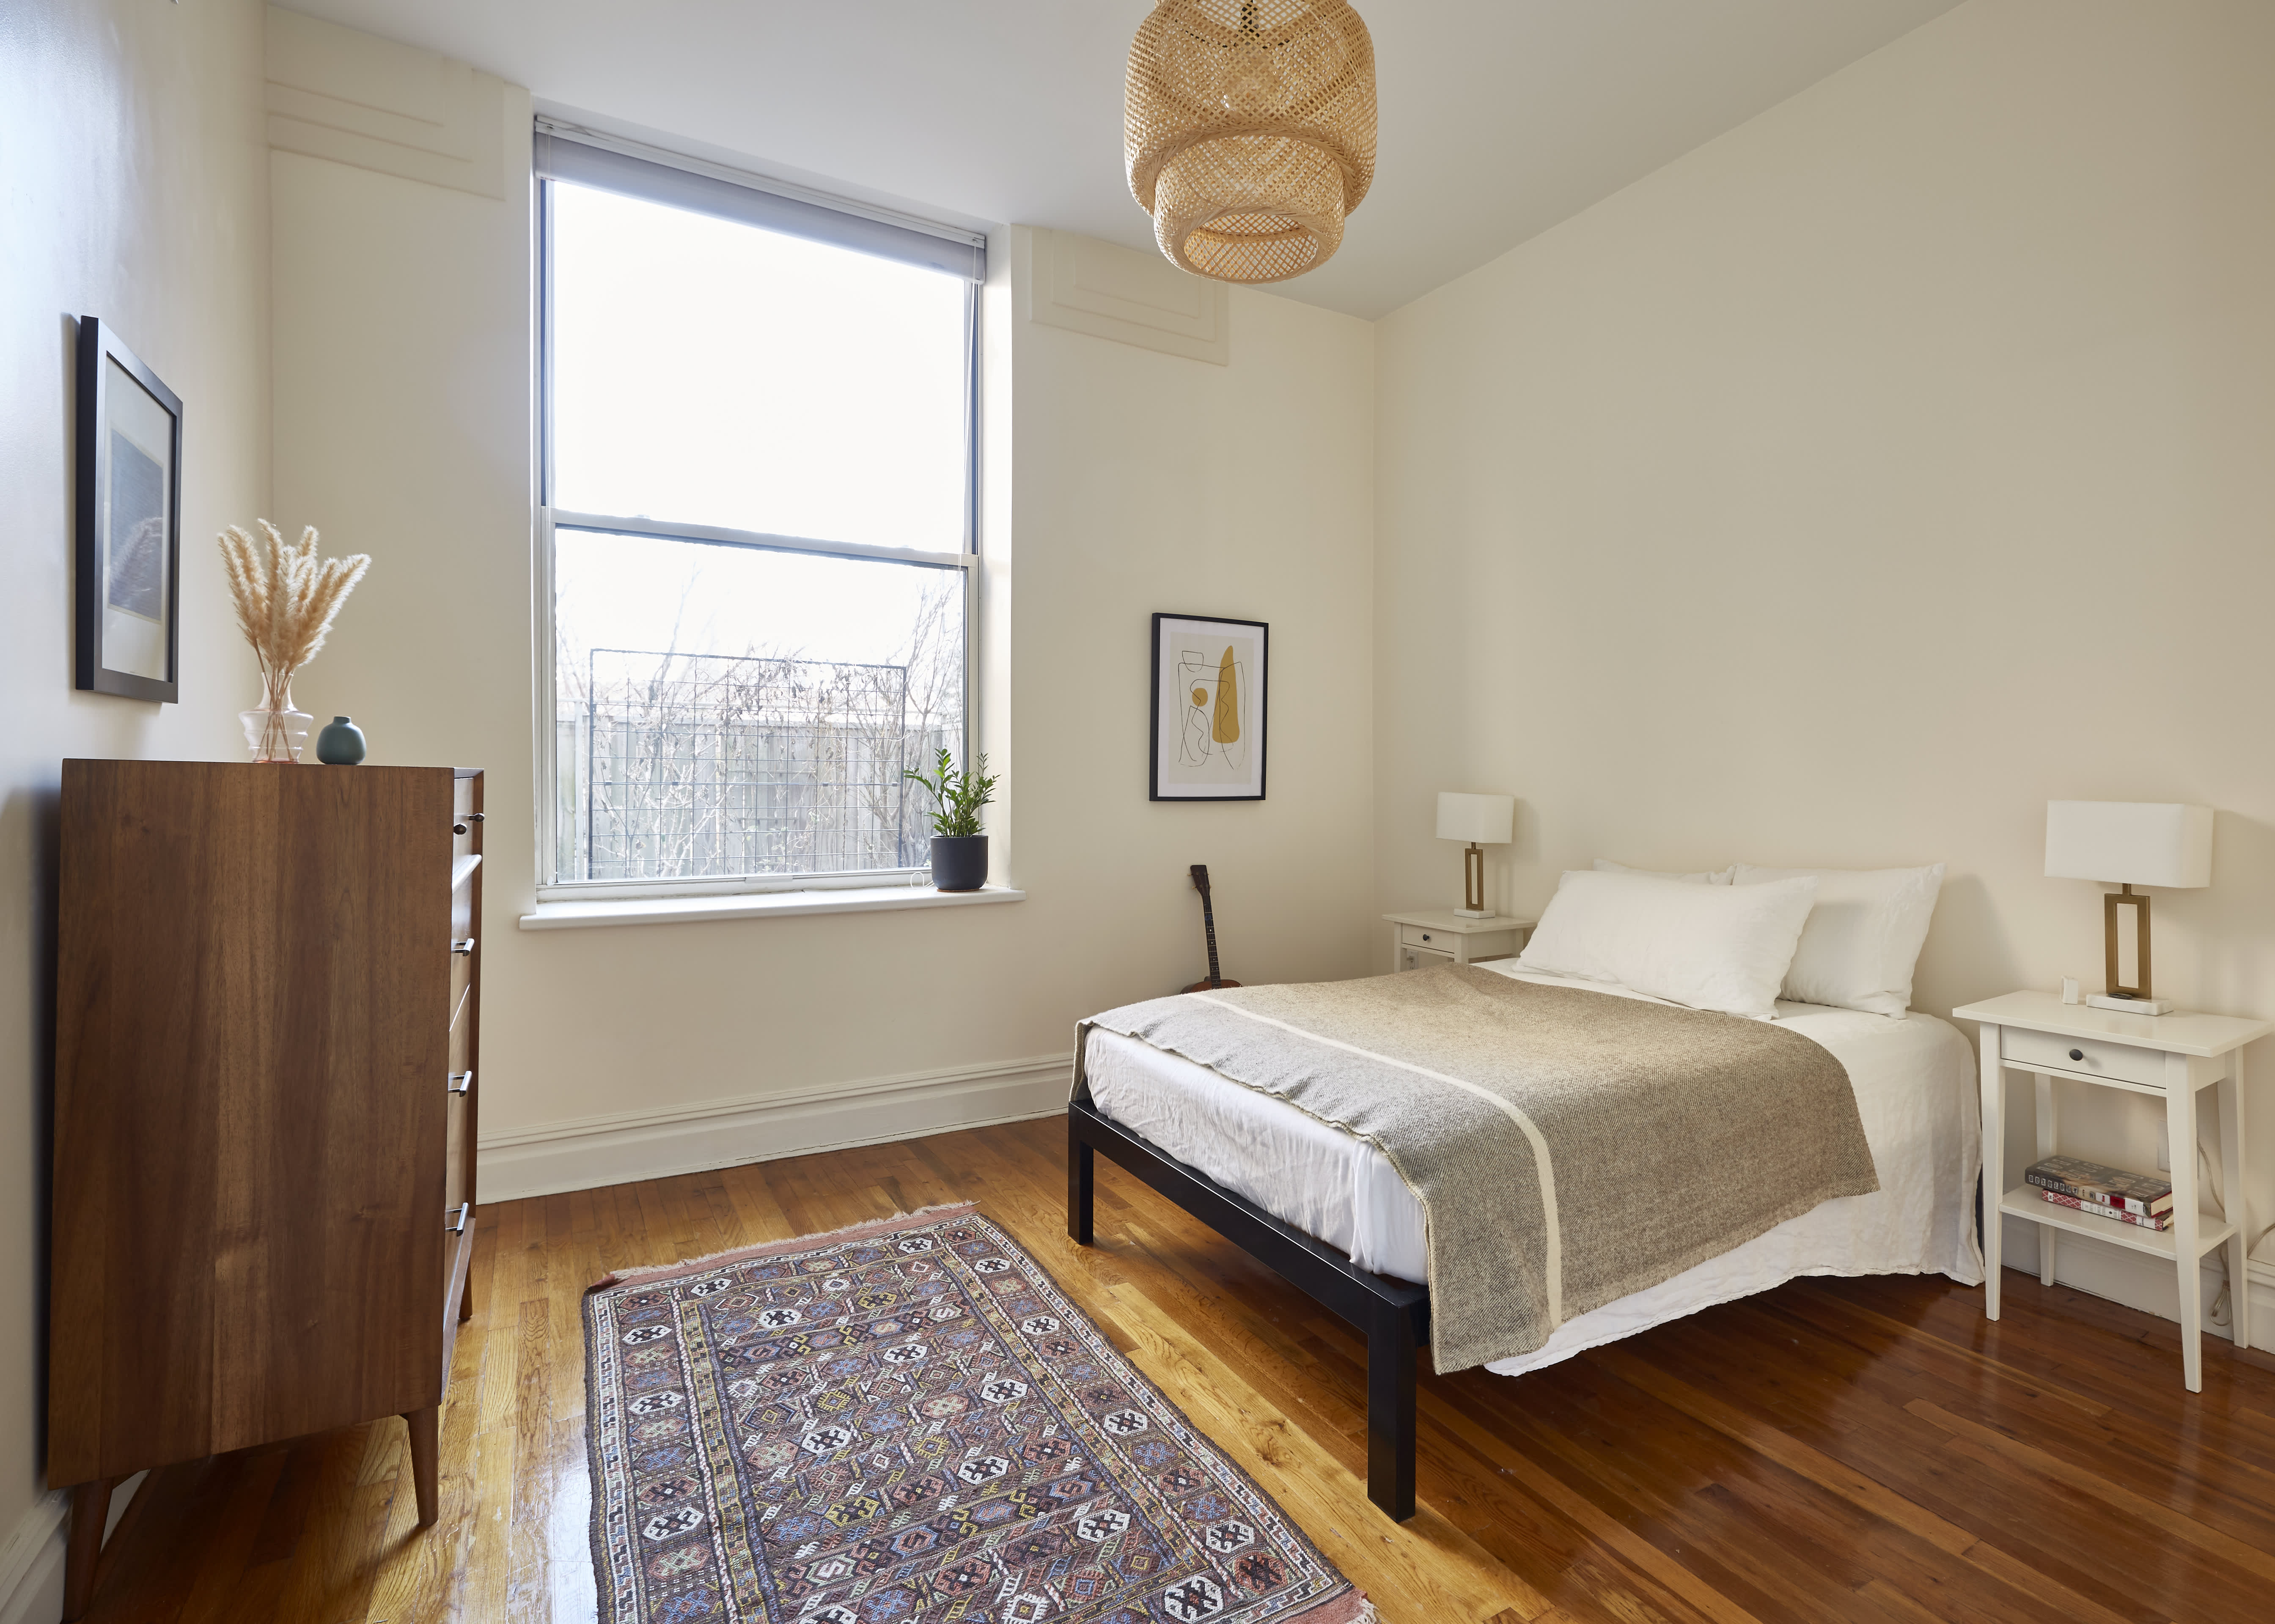 7 Feng Shui Bedroom Design Ideas to Try This Weekend